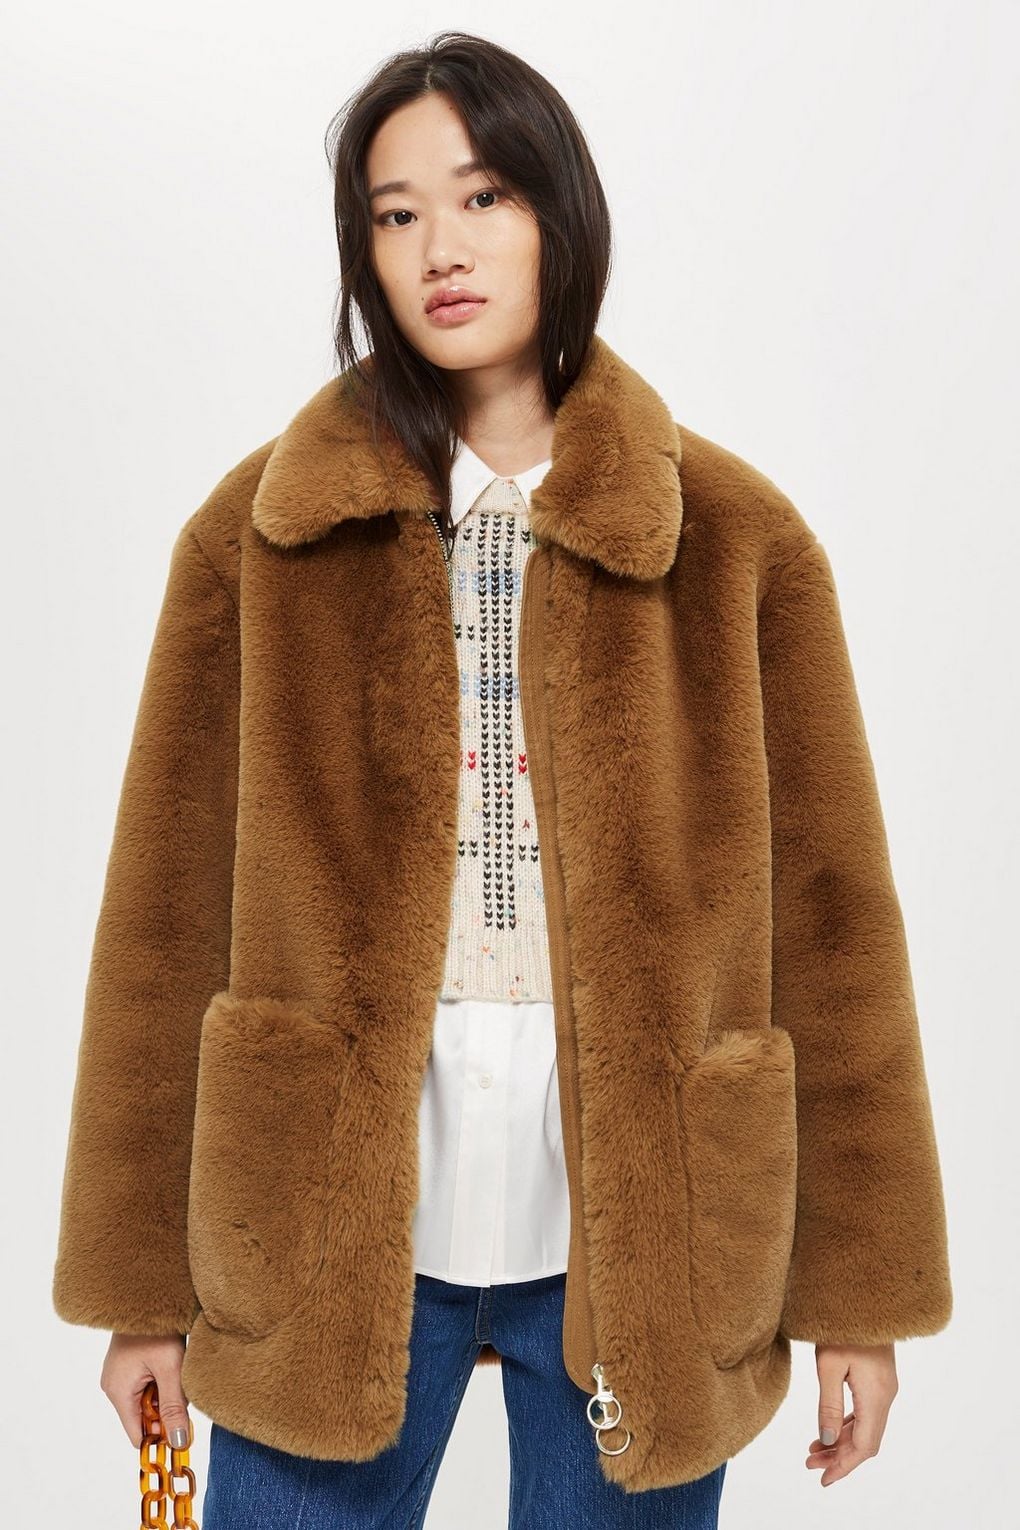 Topshop Faux Fur Zip-Up Jacket  18 Soft and Furry Jackets That